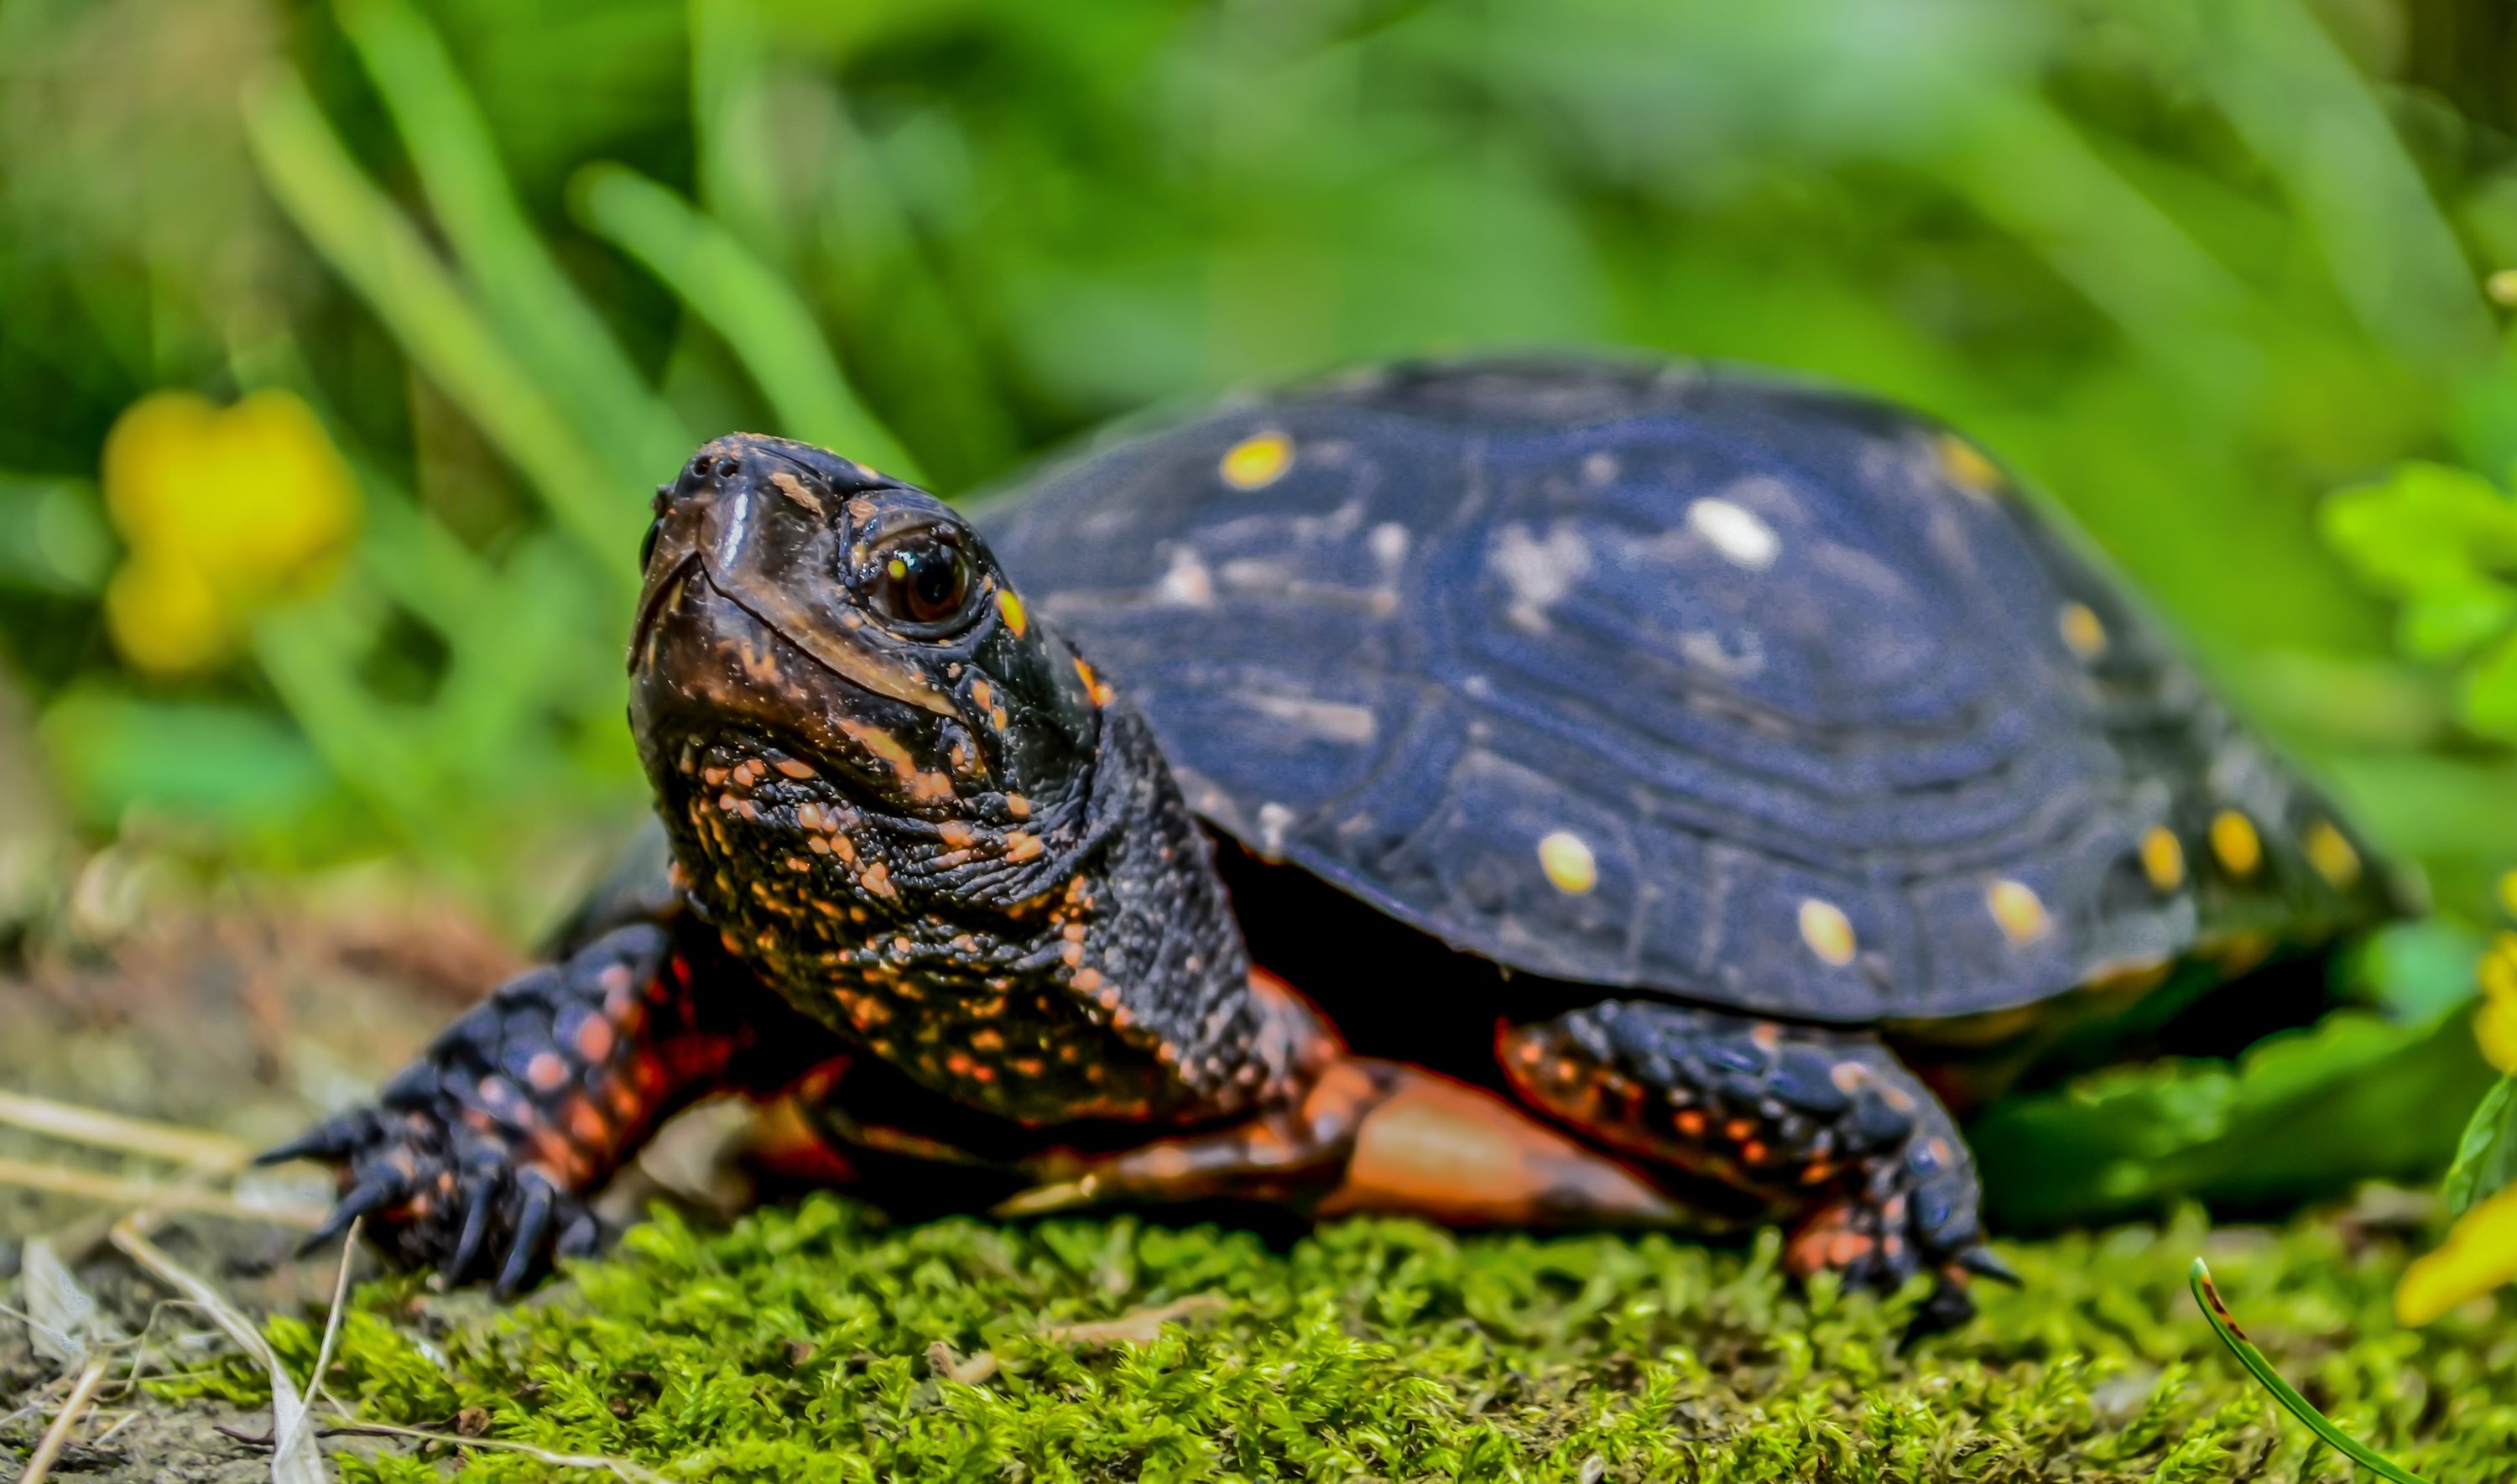 A spotted turtle in the grass.